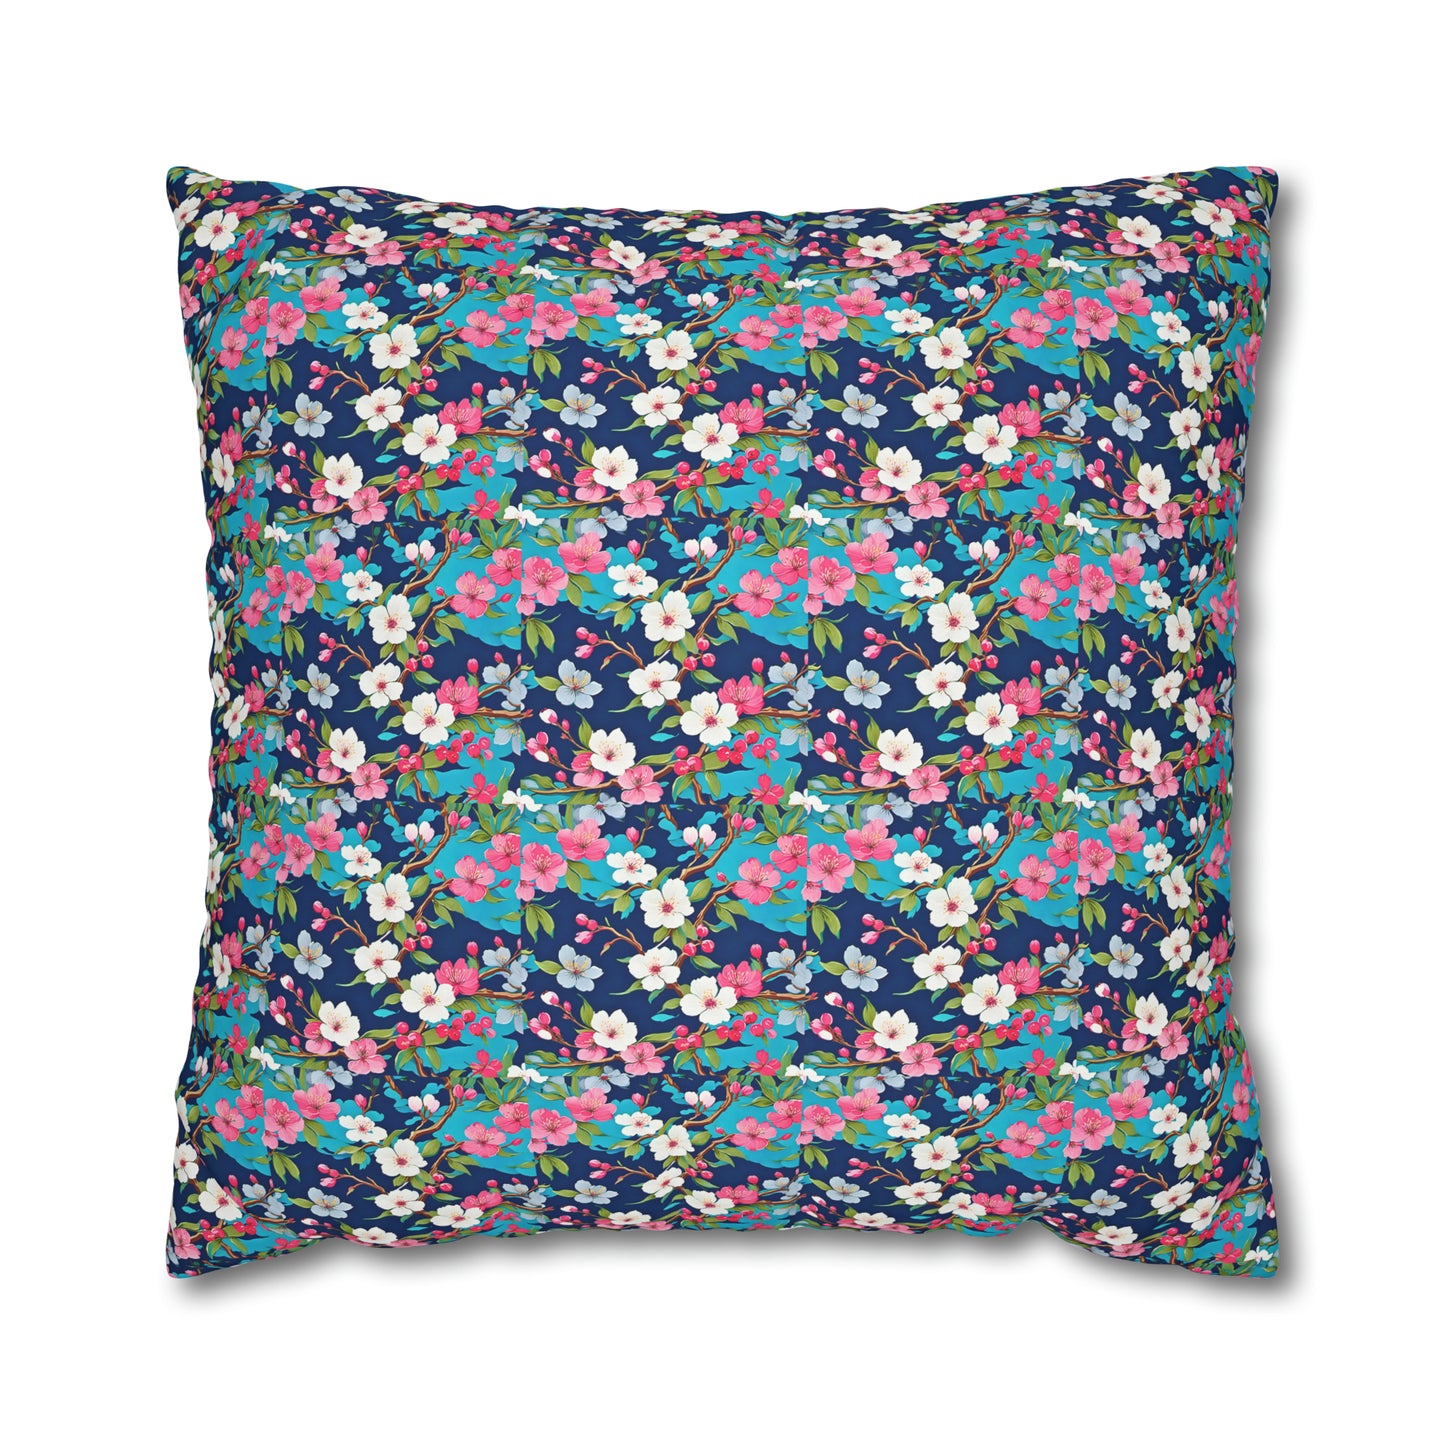 Cherry Blossoms Japanese Floral Decorative Spun Polyester Pillow Cover